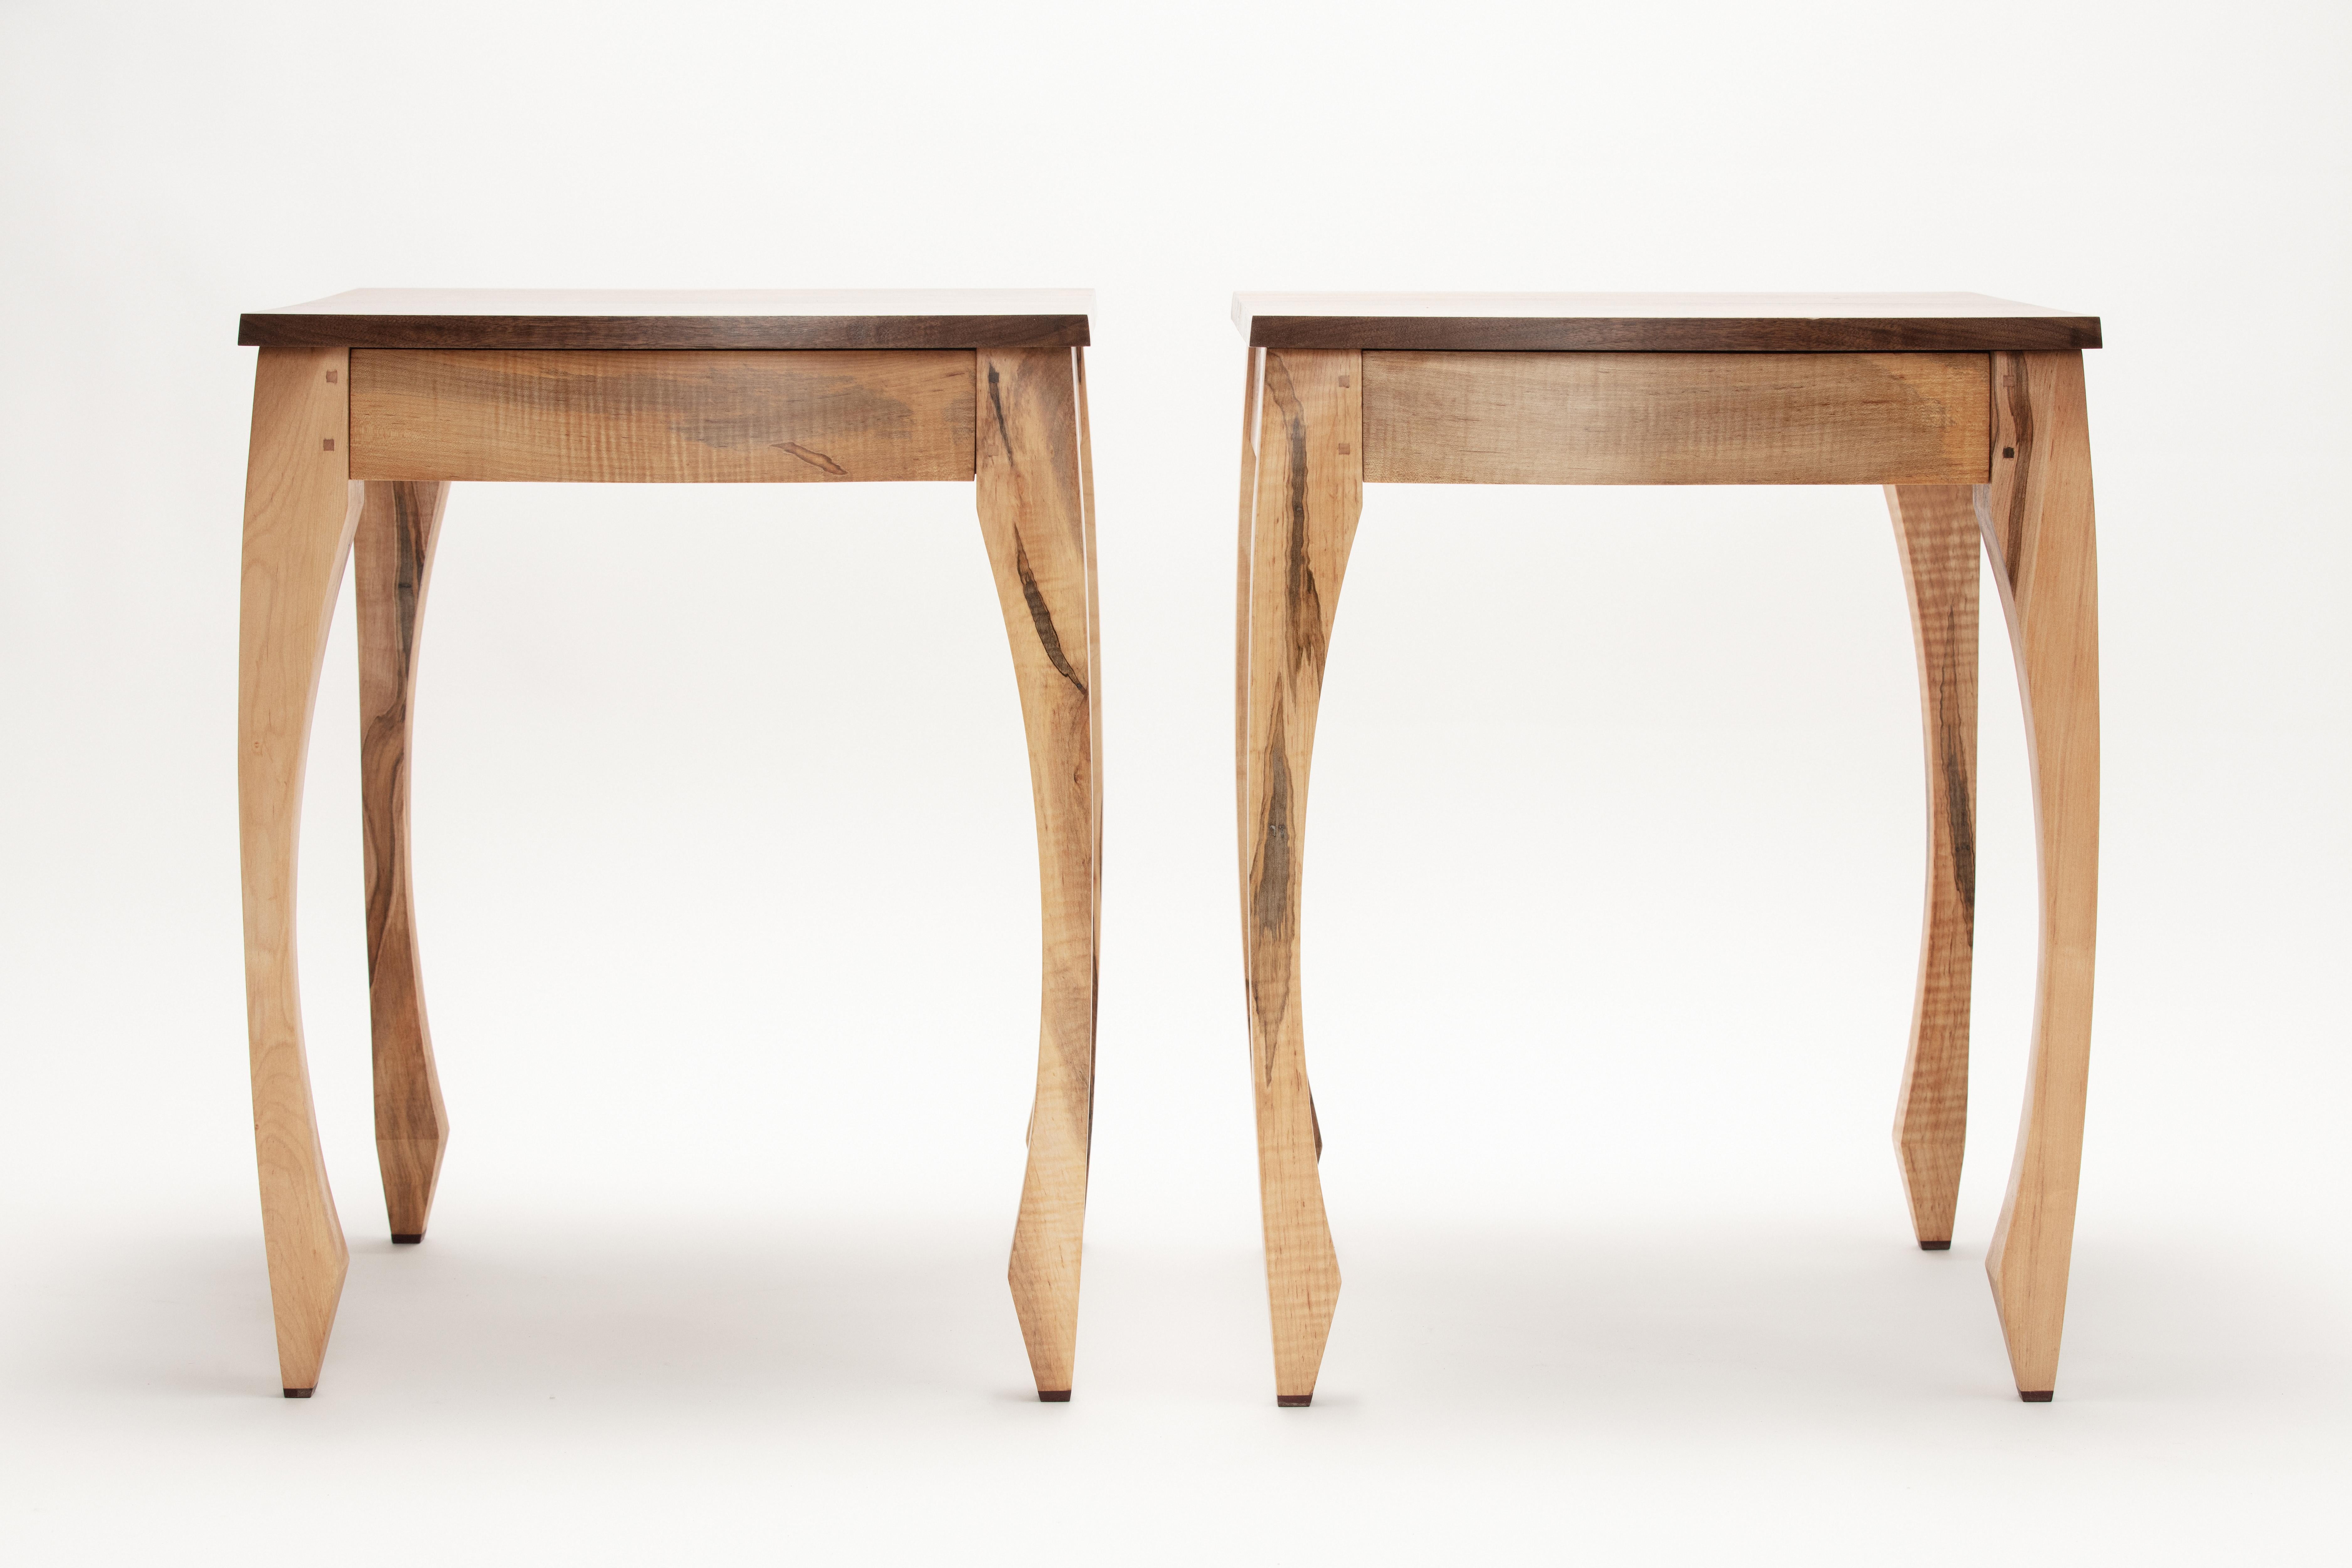 This one of a kind pair of BedSideTables were hand crafted from Curly Maple Ambrosia and richly grained Black Walnut.  The design sweeps upward from the 